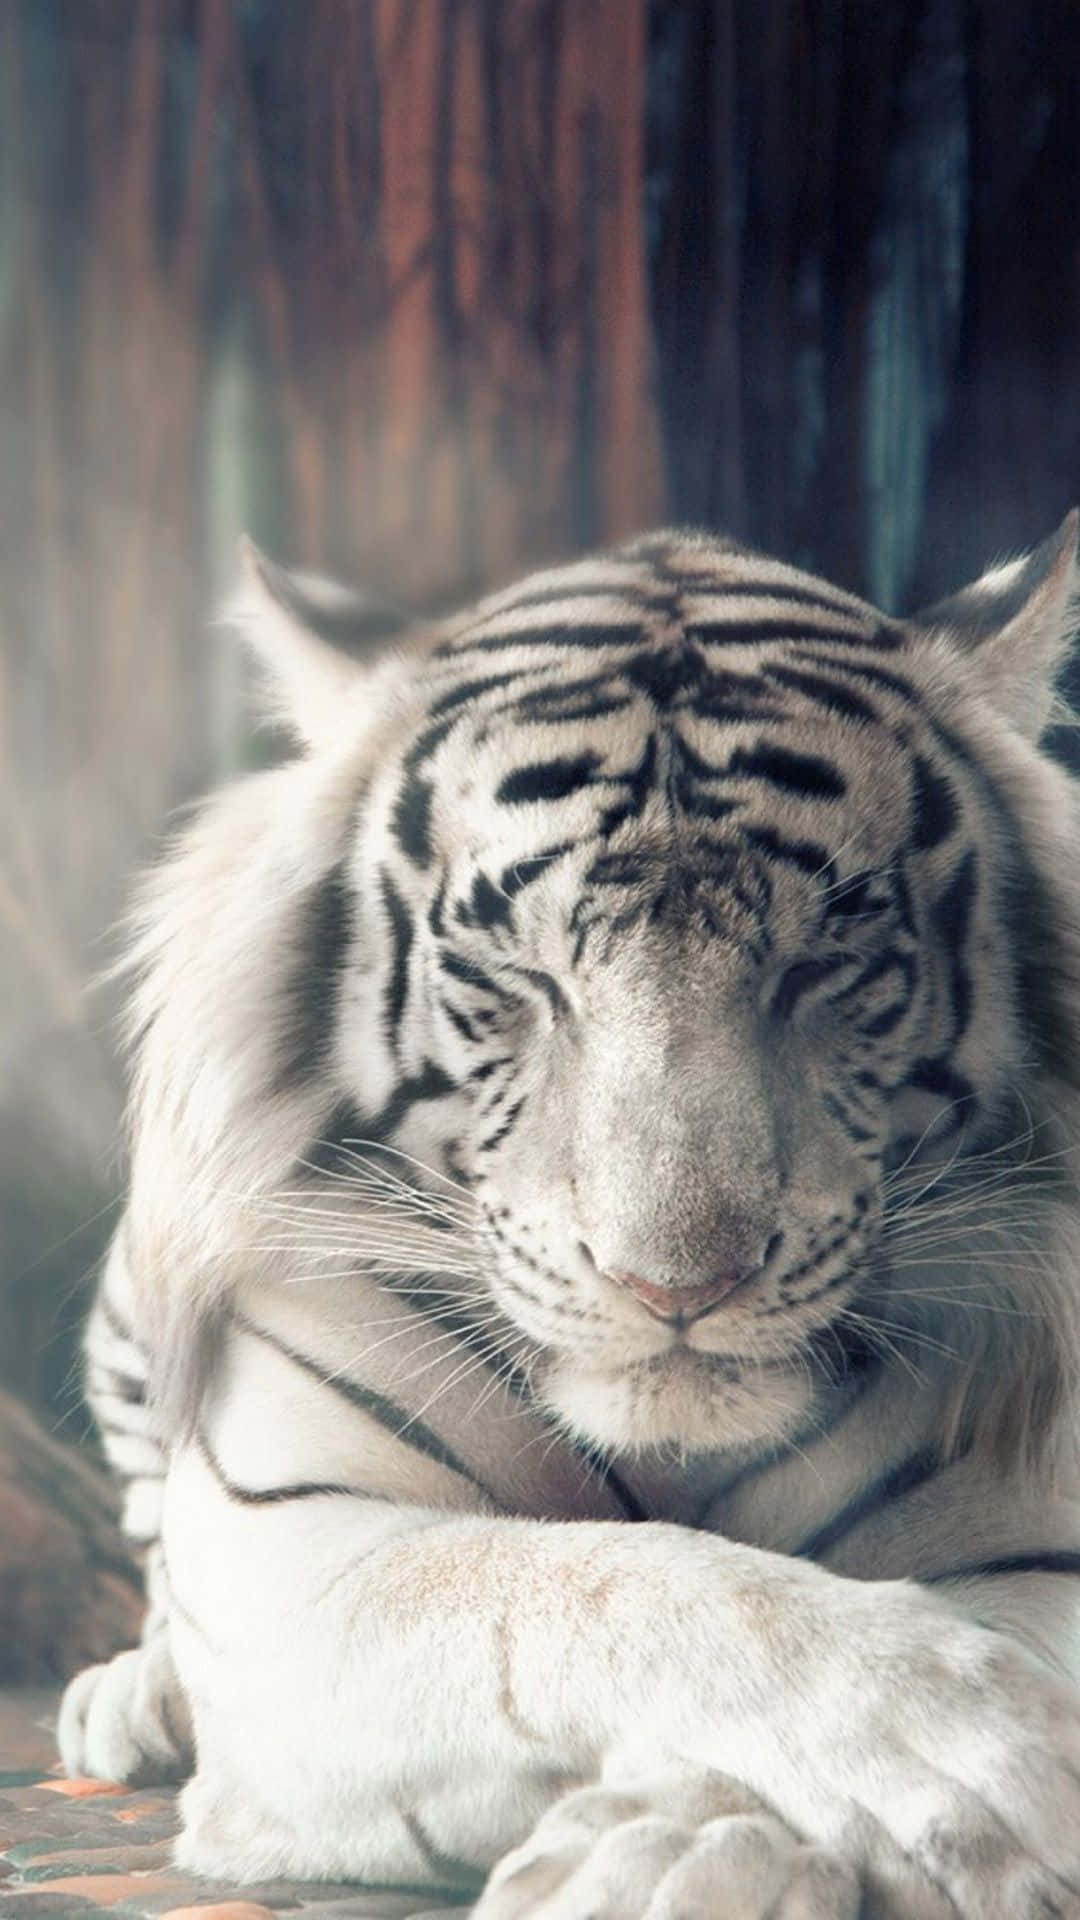 A White Tiger Is Laying Down In The Forest Wallpaper